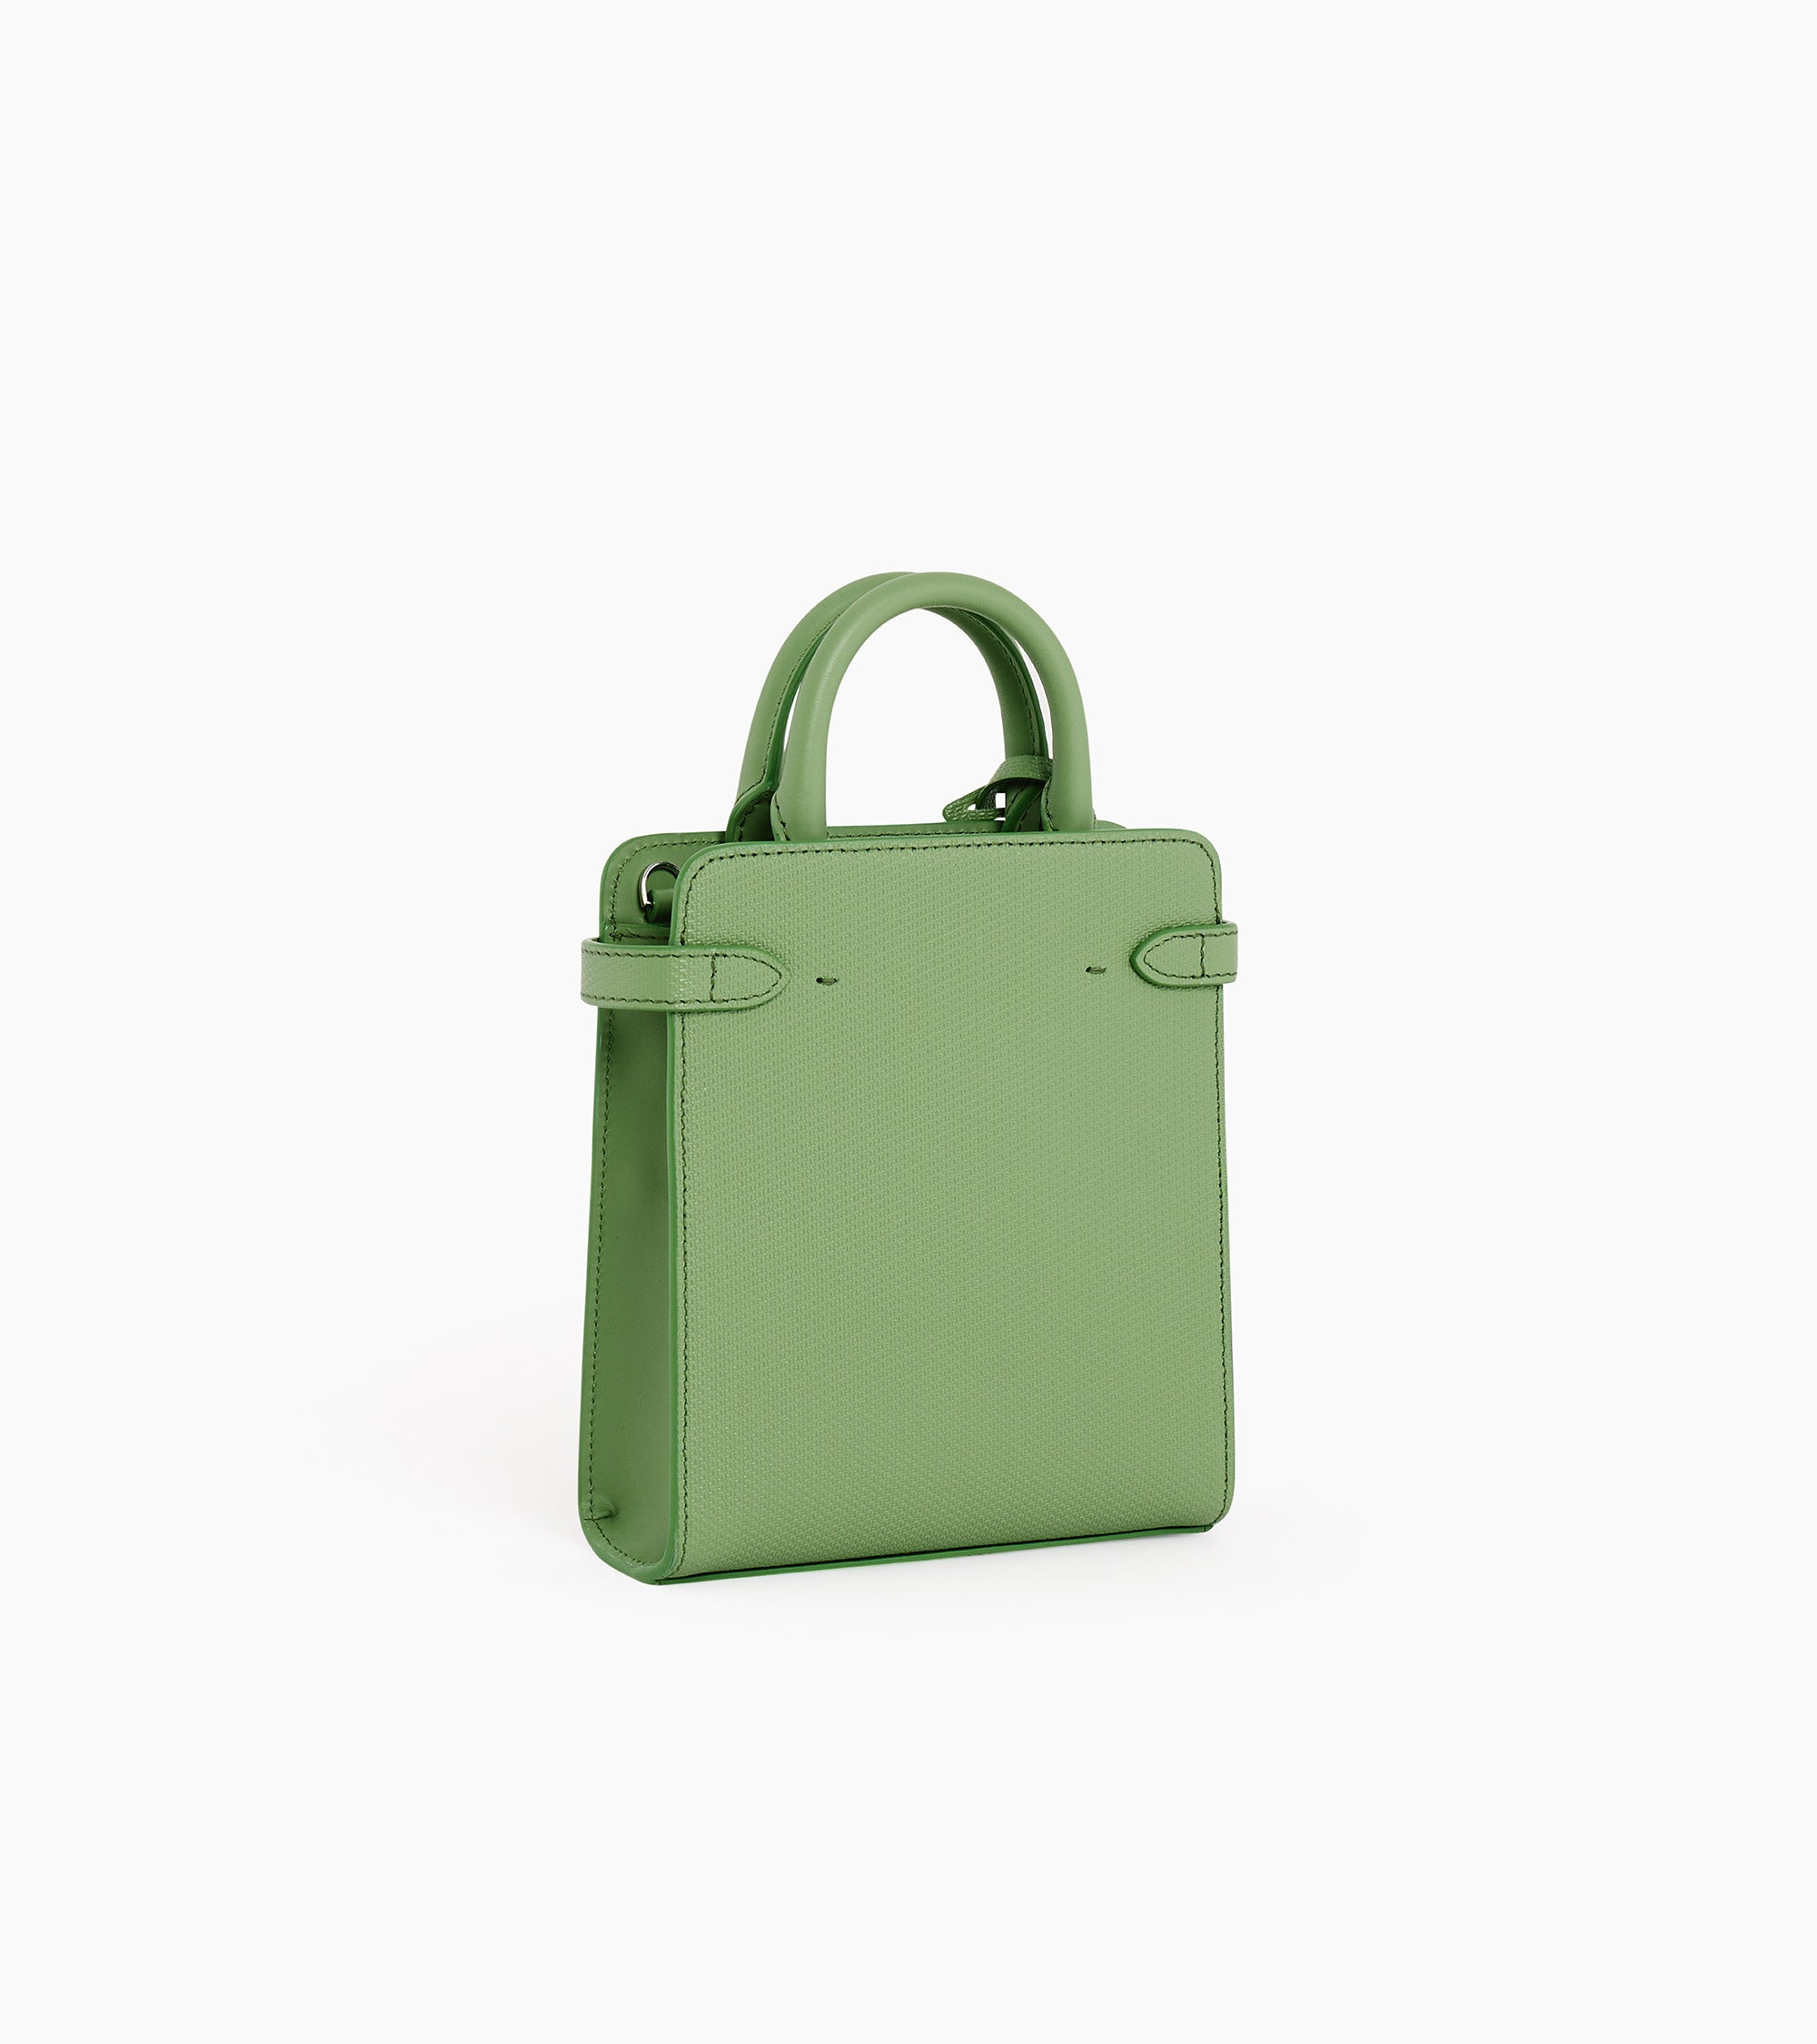 Emilie small vertical handbag in signature T leather